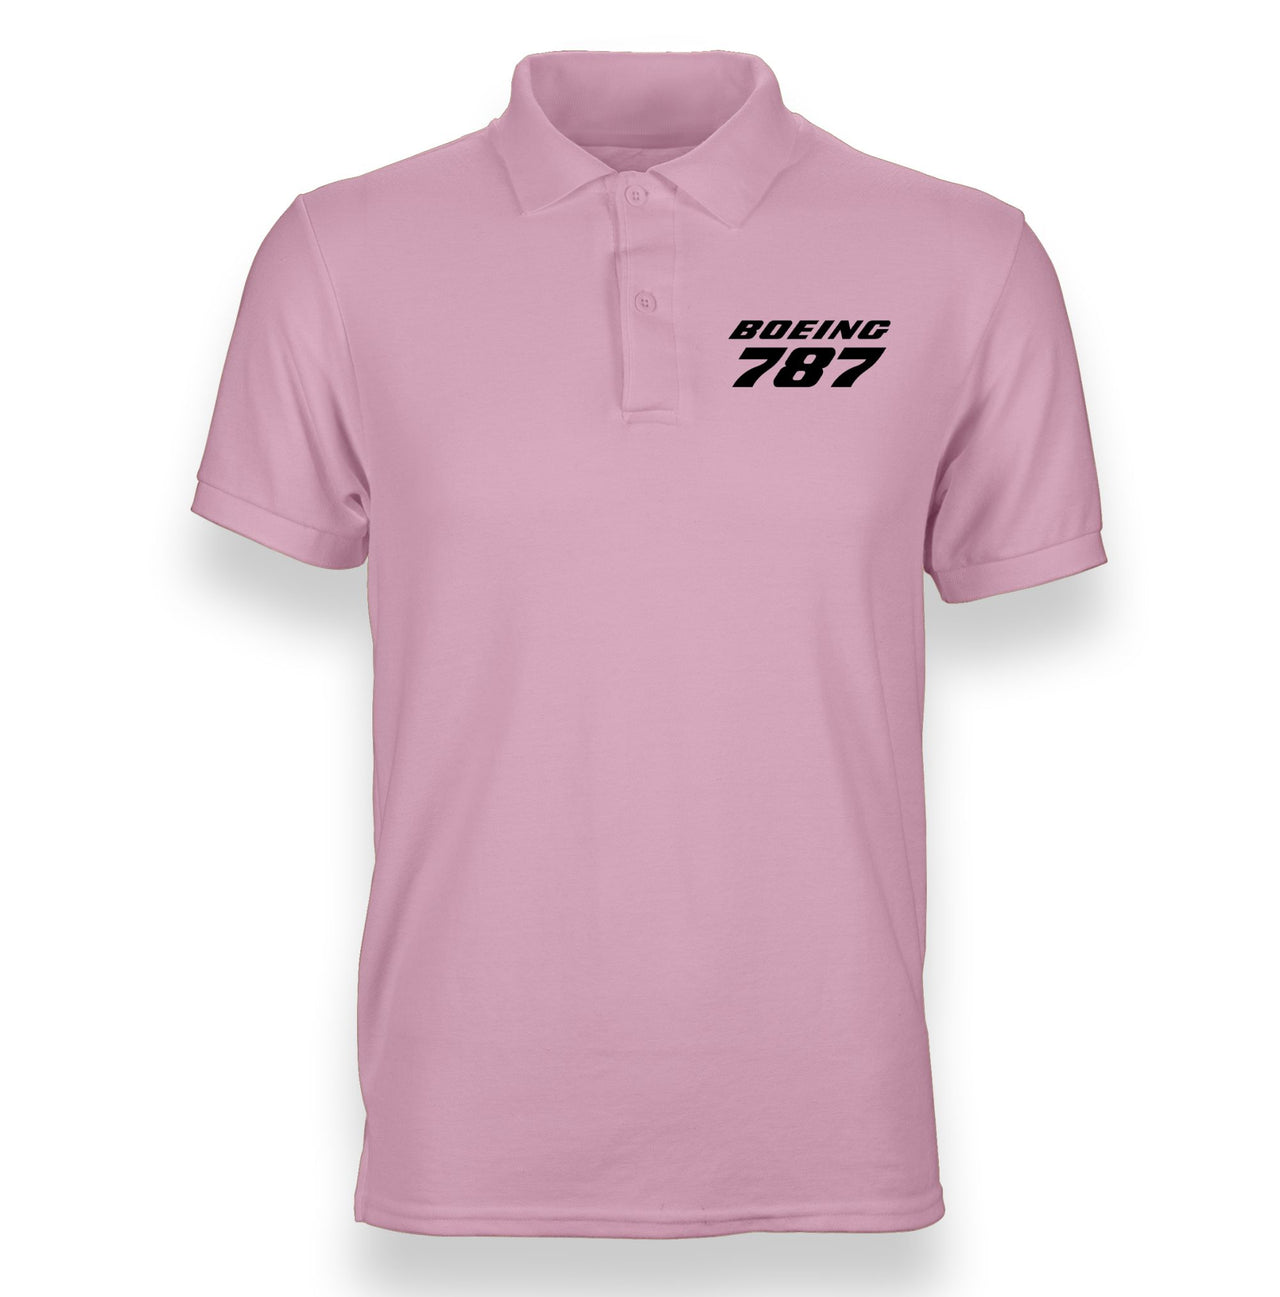 Boeing 787 & Text Designed "WOMEN" Polo T-Shirts